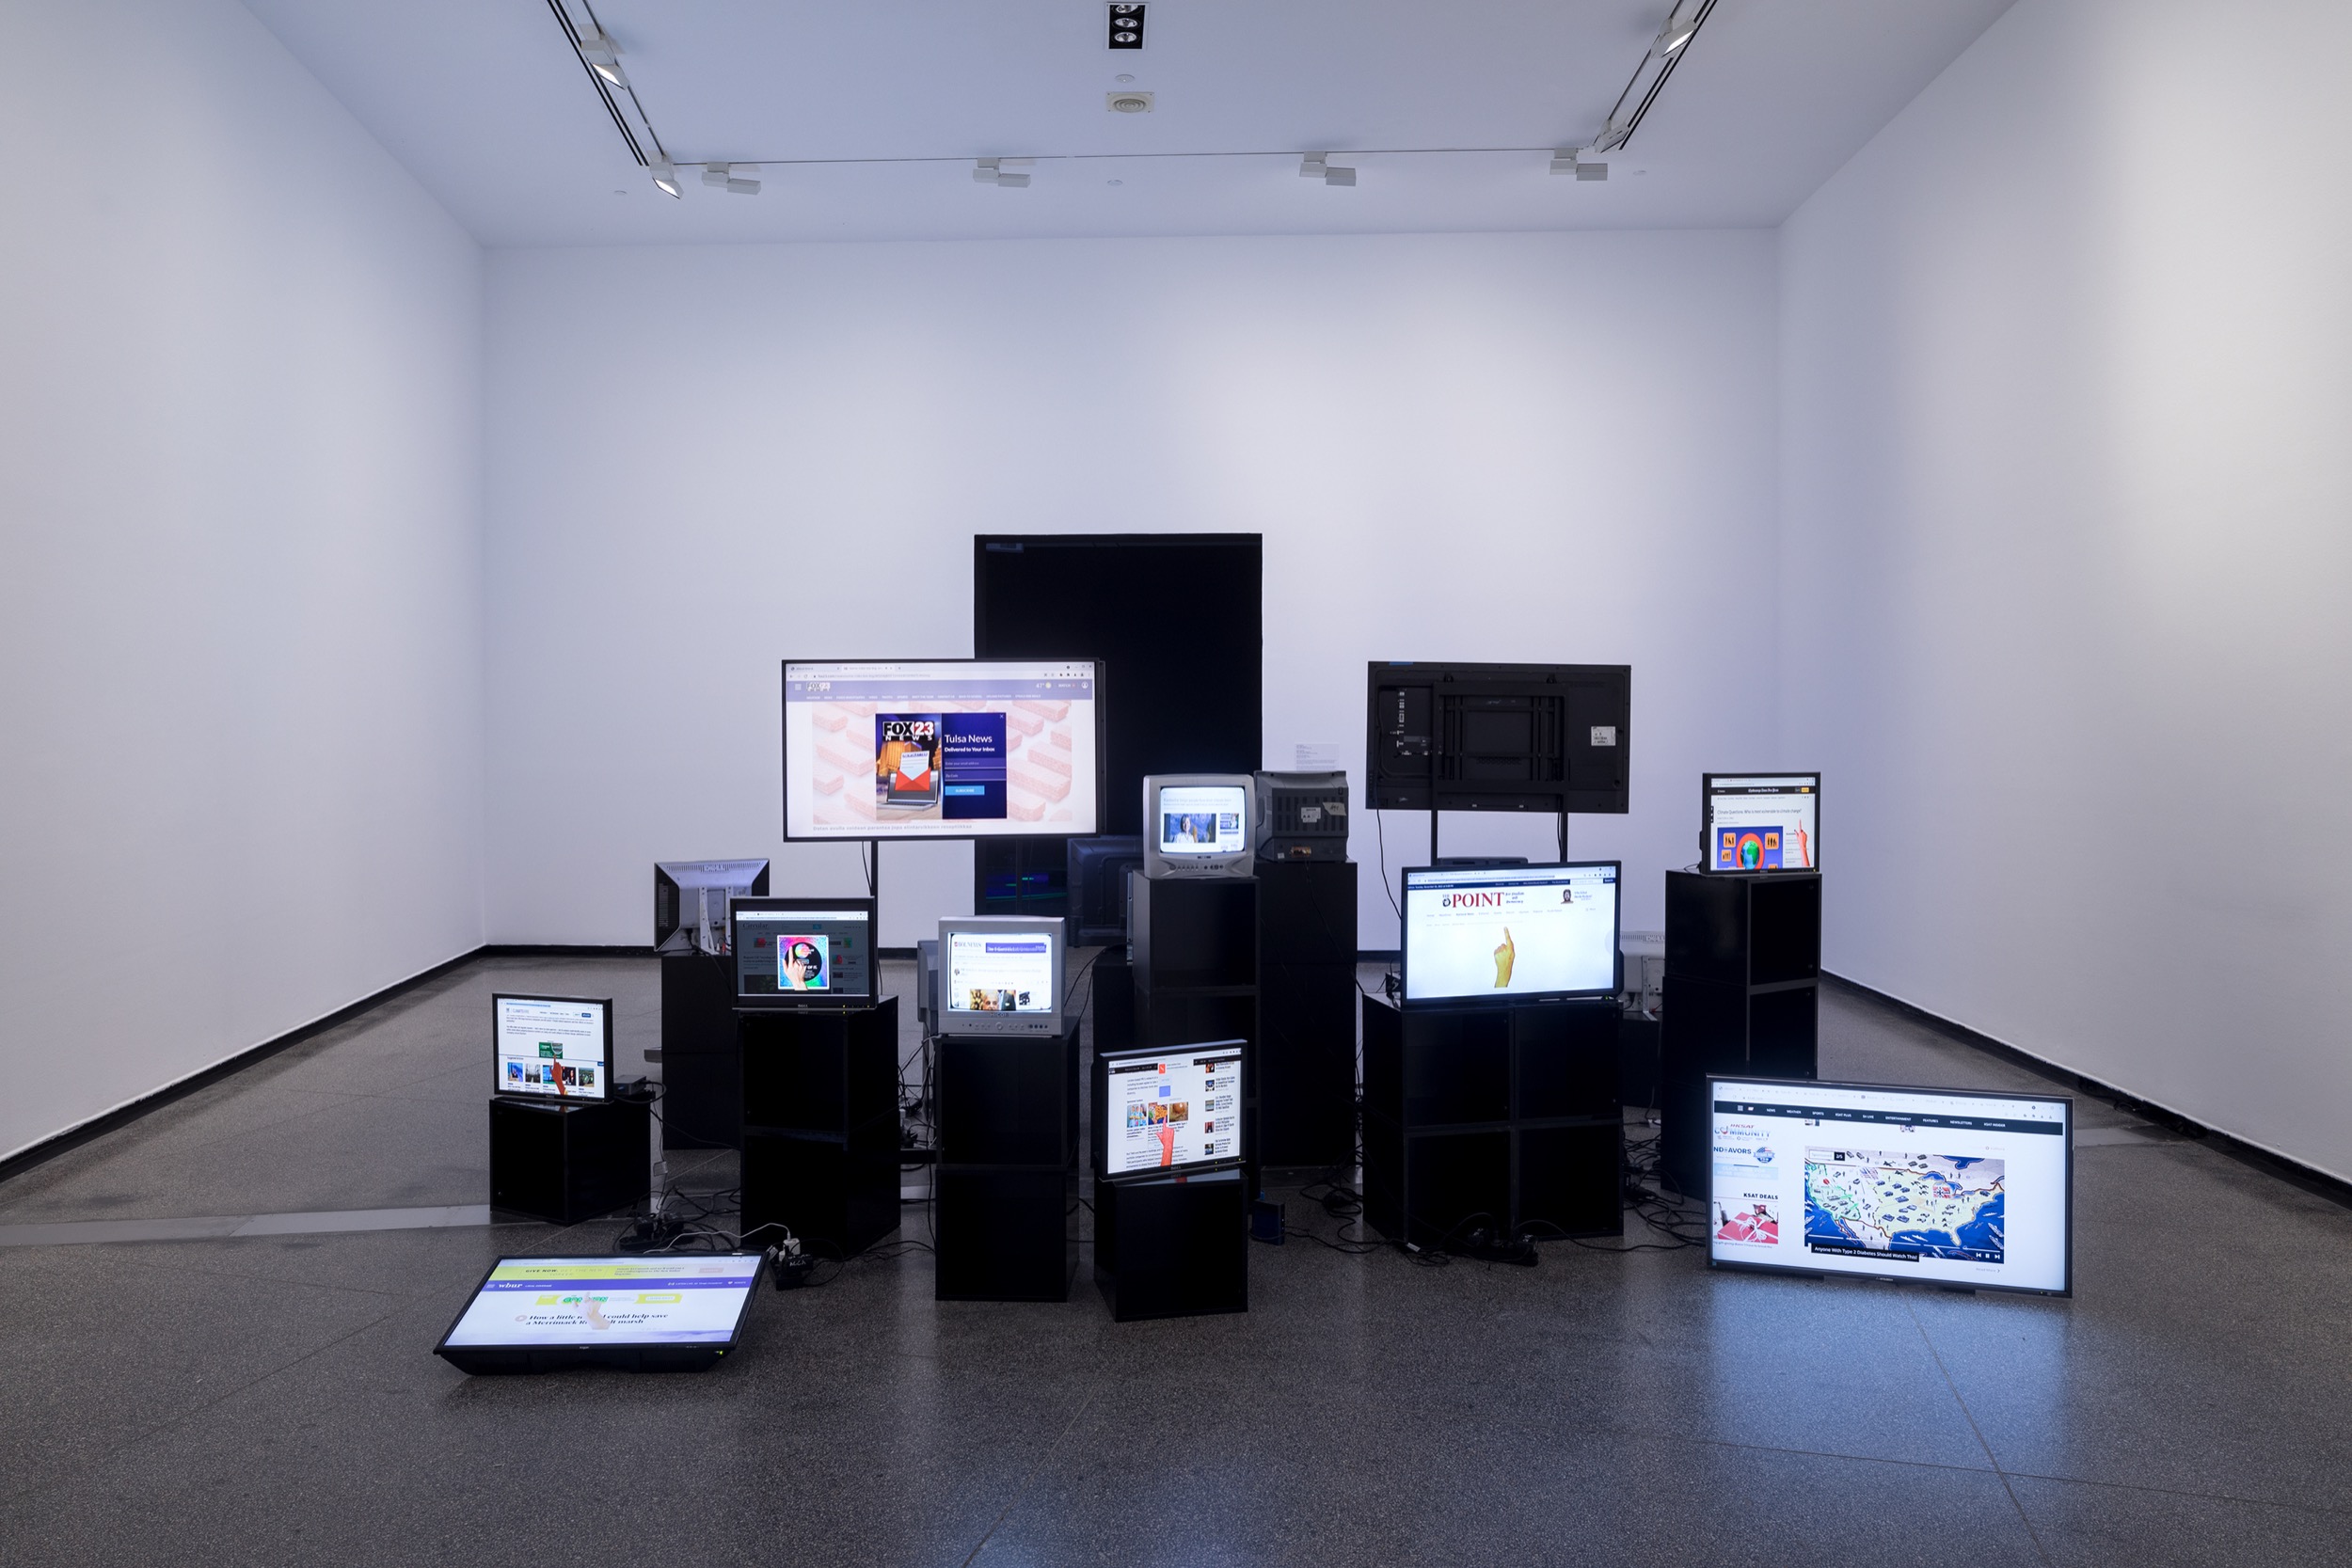 Tega Brain and Sam Lavigne, Synthetic Messenger 2021, installation view, Australian Centre for Contemporary Art, Melbourne. Courtesy the artist. Photograph: Andrew Curtis